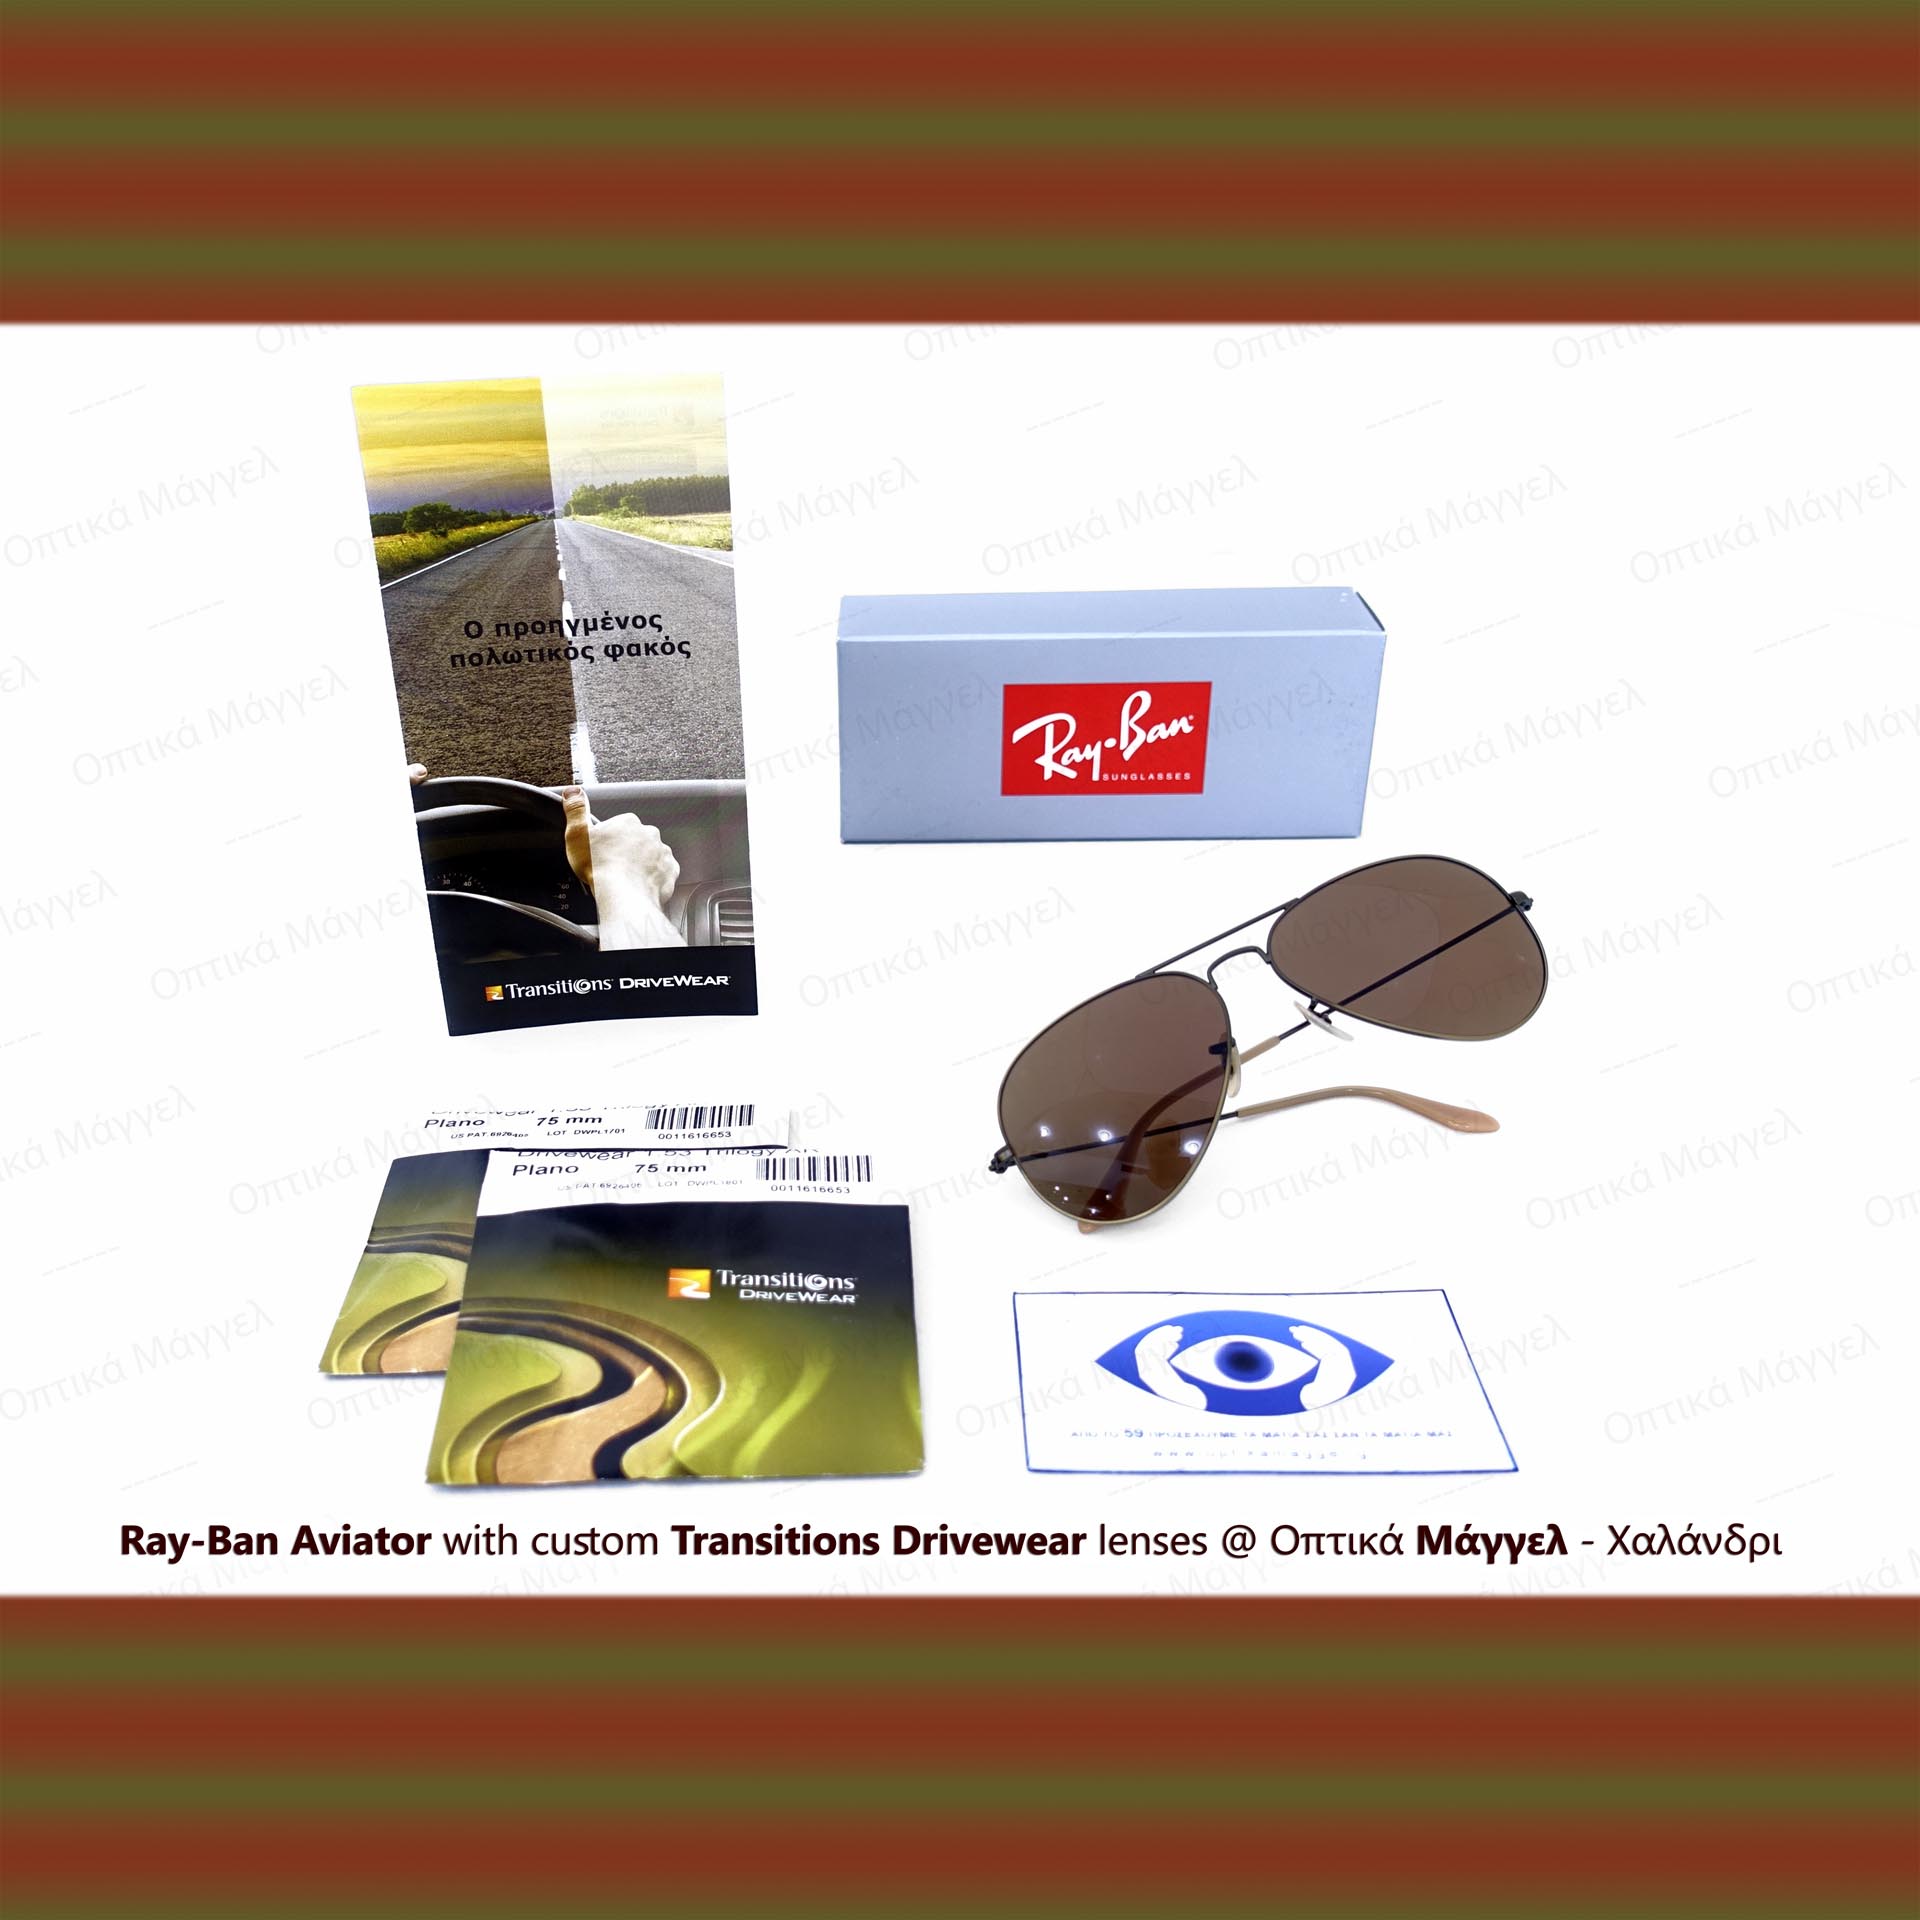 Perfection! Ray-Ban Aviator with Transitions Drivewear Lenses